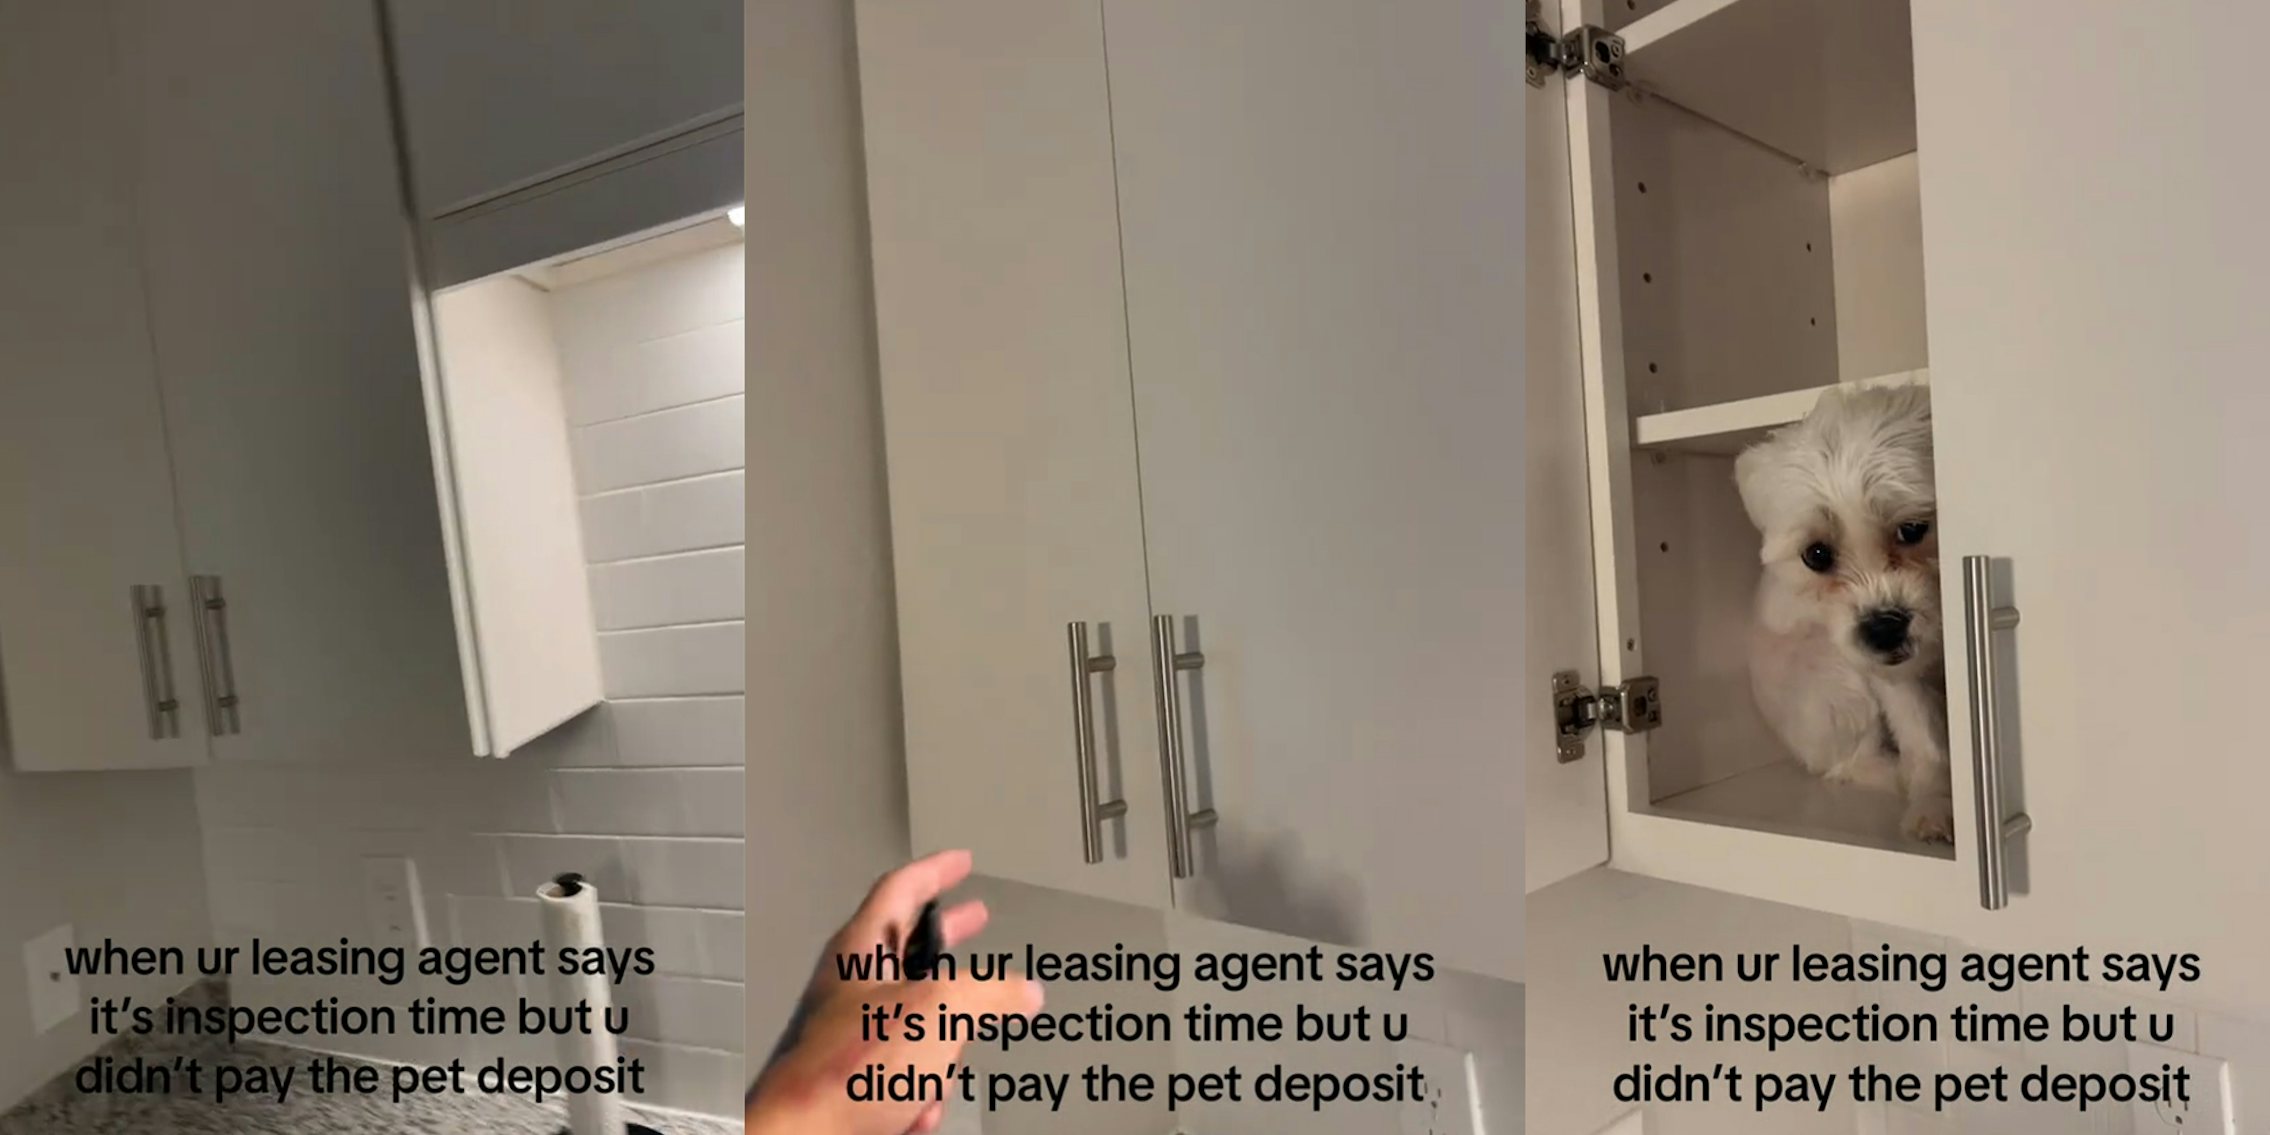 Renter has to hide pet during inspection after not paying pet deposit